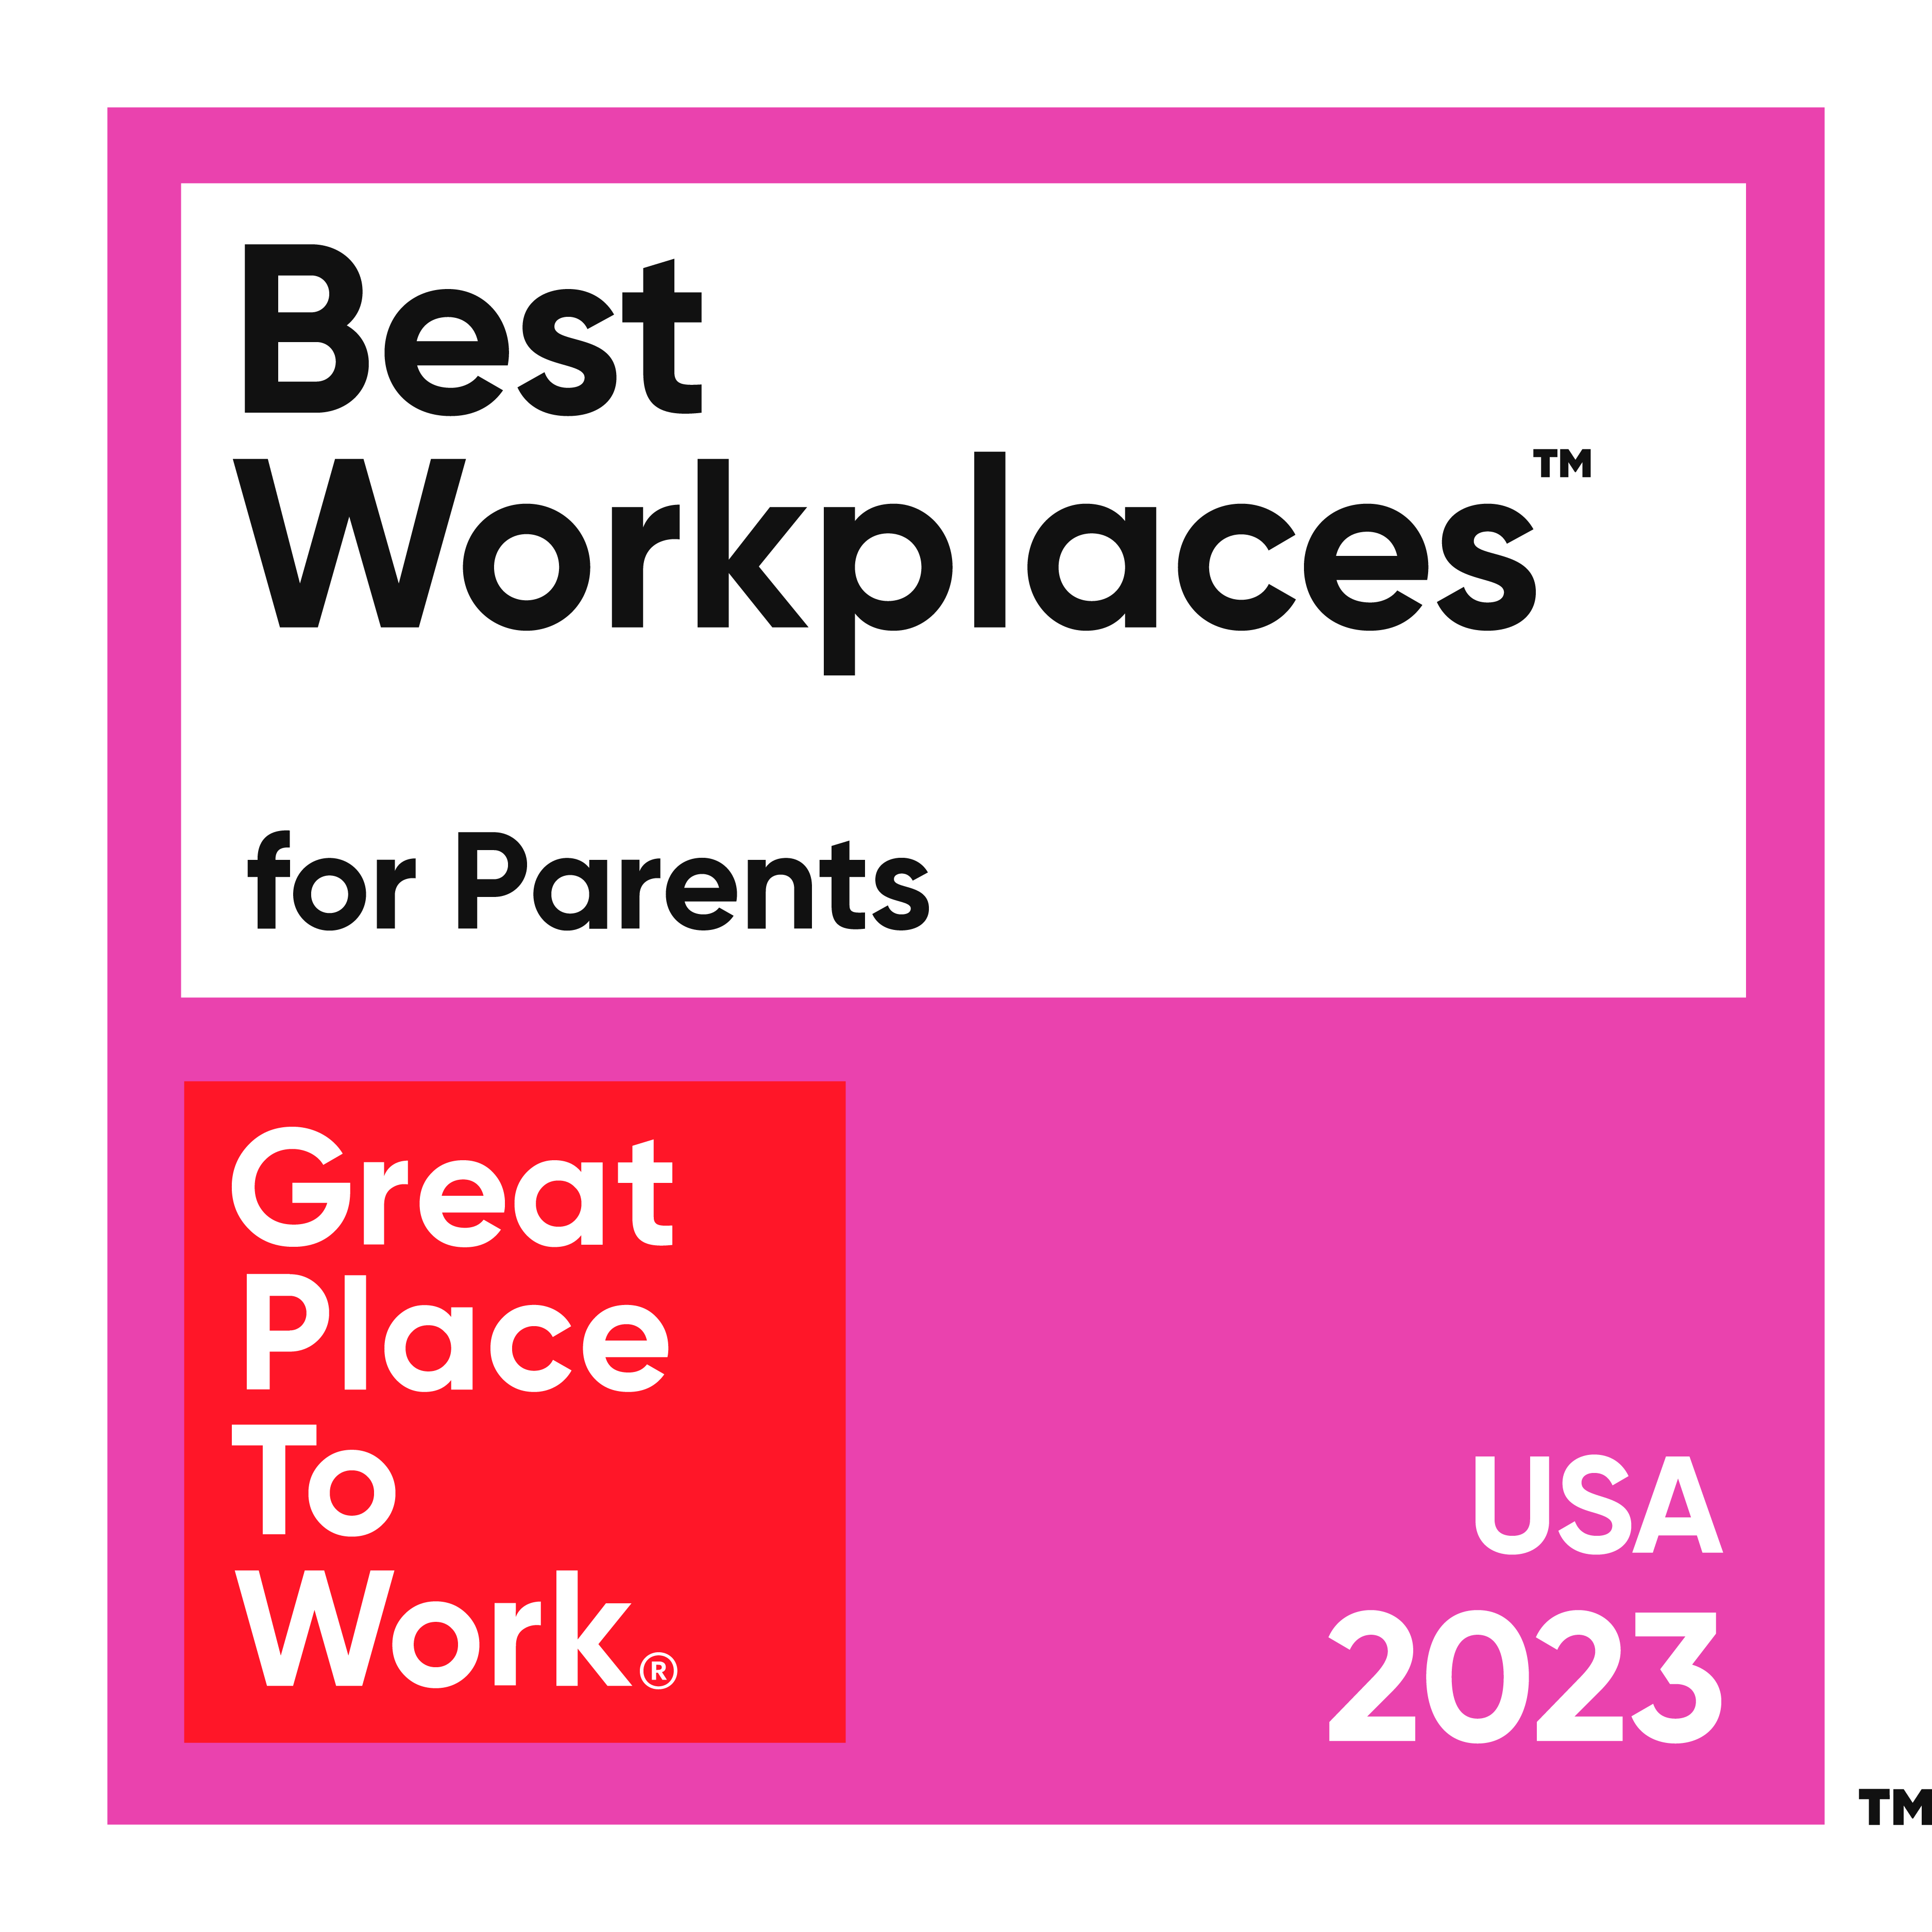 Best Workplaces for Parents. Great Place to Work, USA 2023